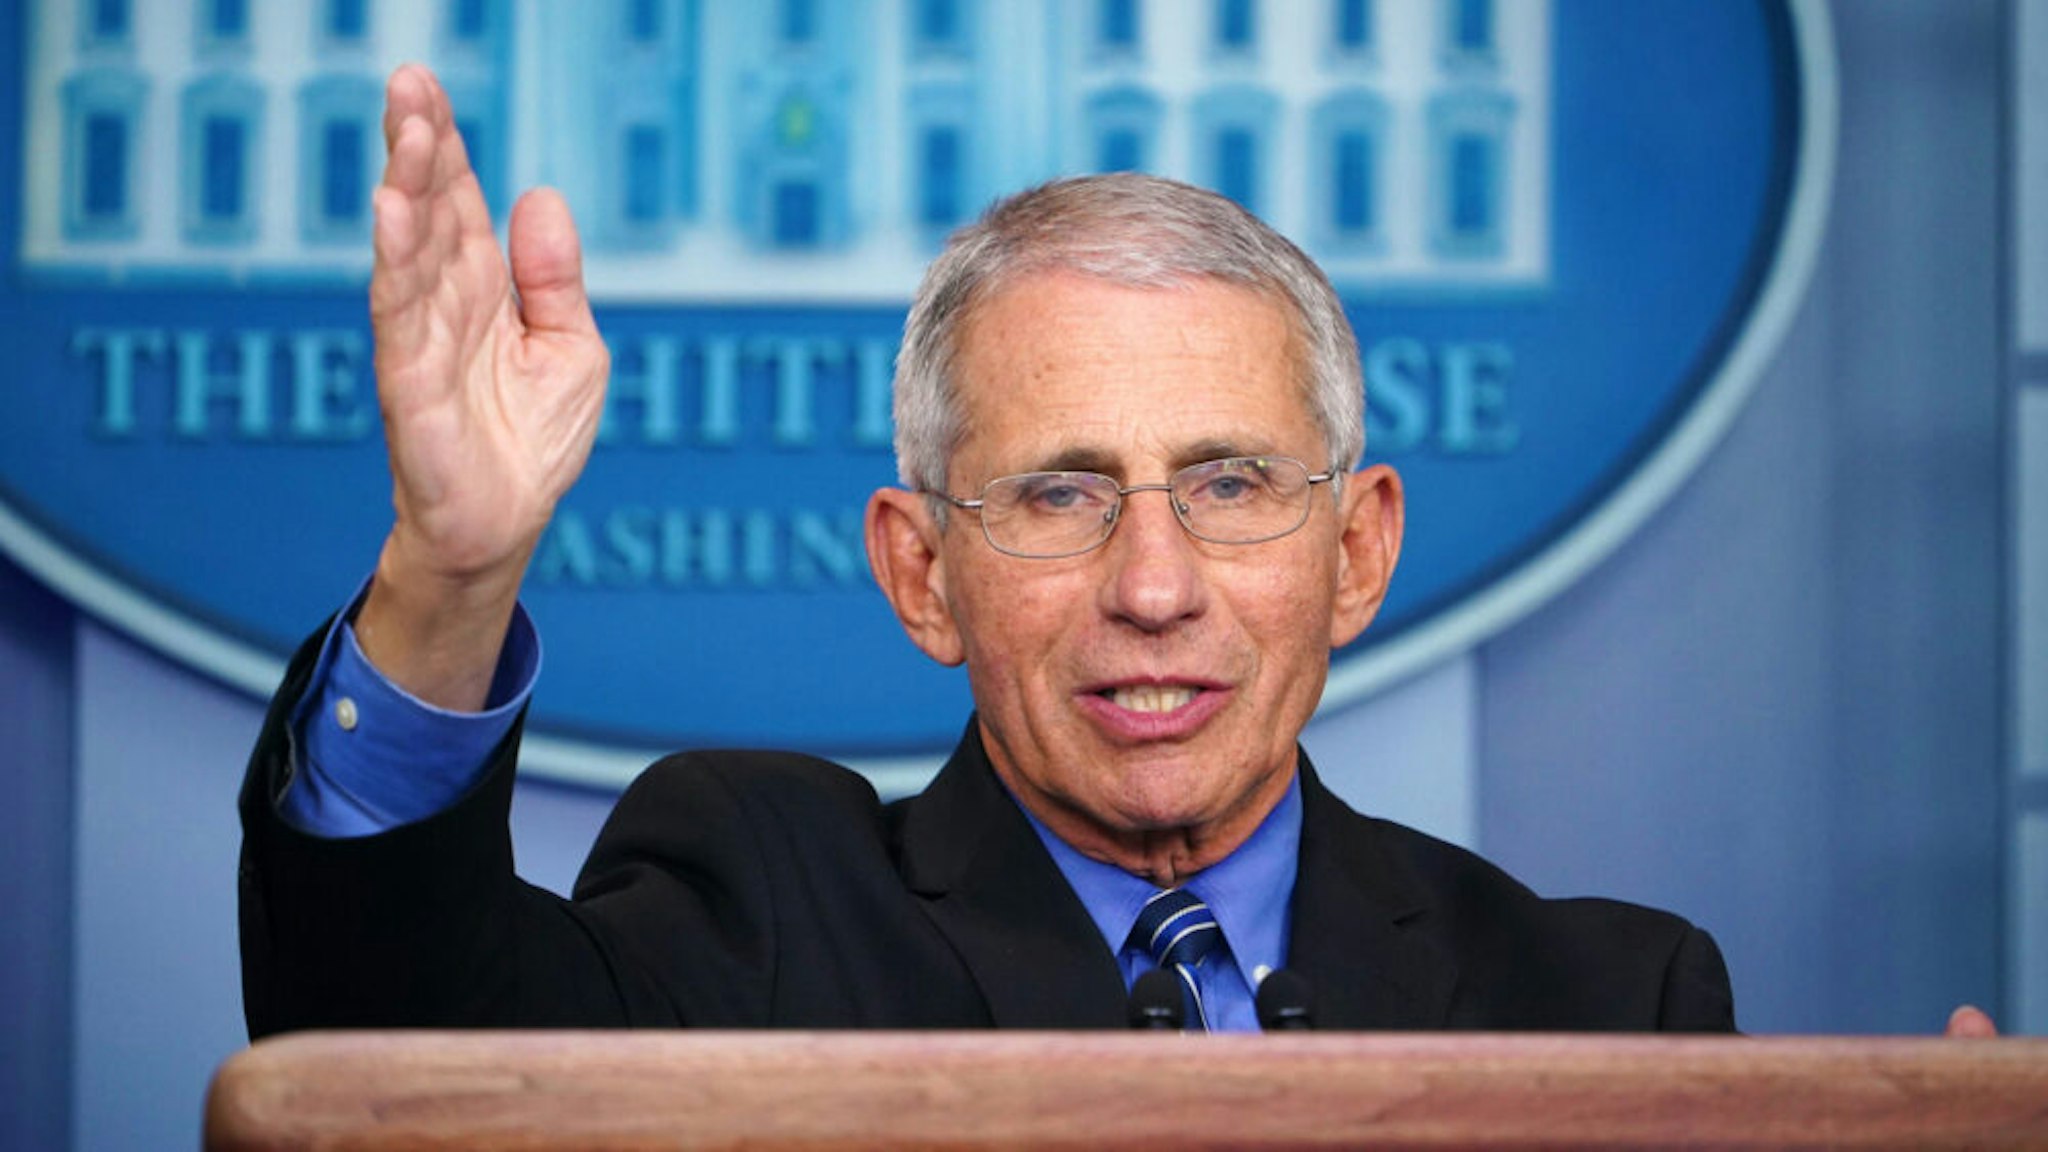 Director of the National Institute of Allergy and Infectious Diseases Anthony Fauci speaks during the daily briefing on the novel coronavirus, COVID-19, at the White House on March 24, 2020, in Washington, DC.